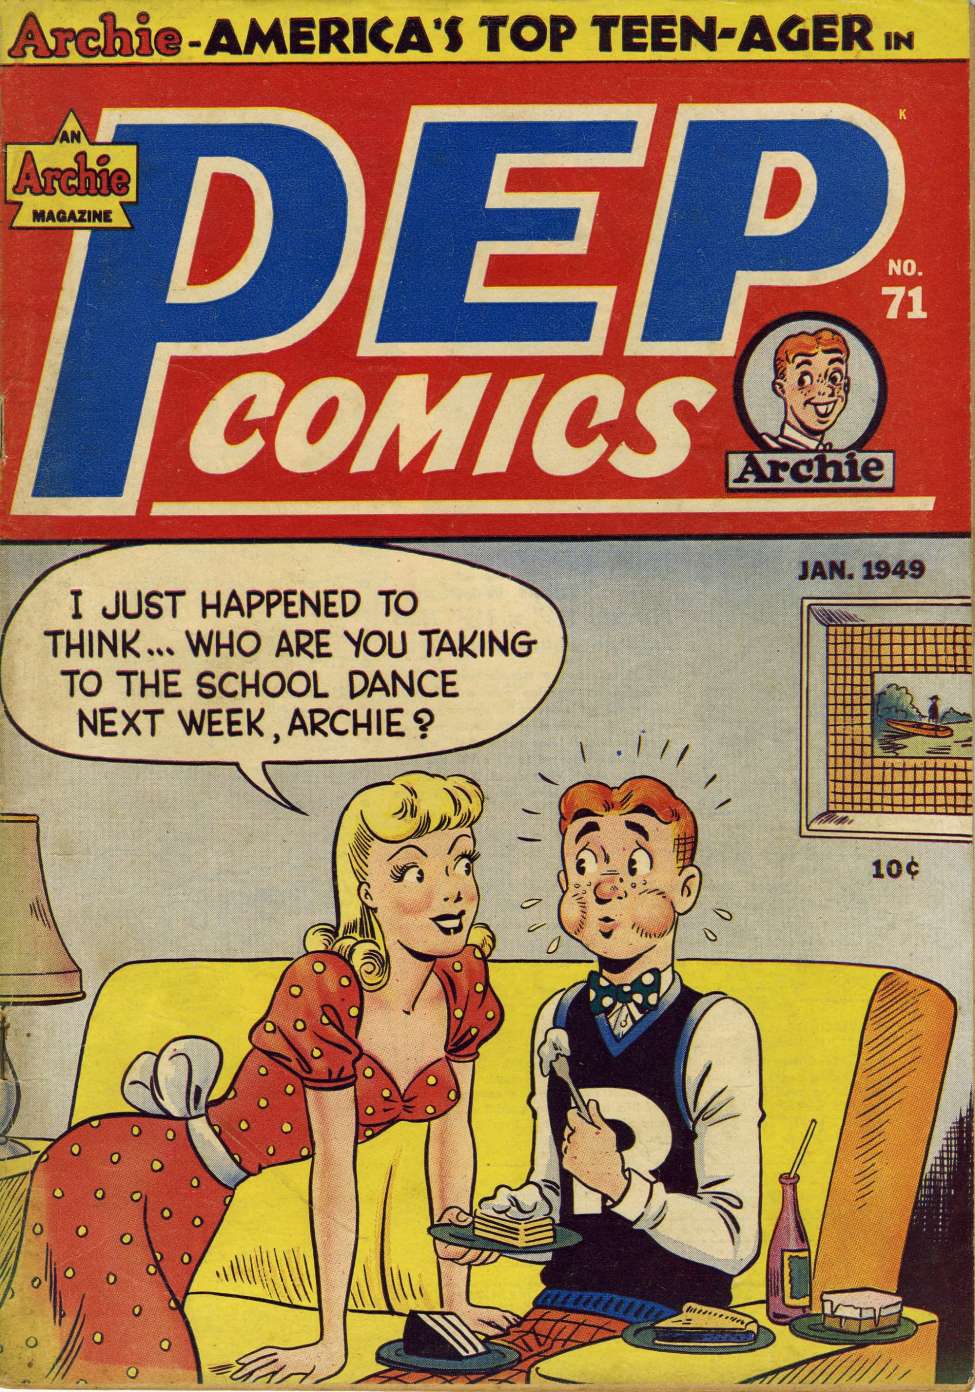 Book Cover For Pep Comics 71